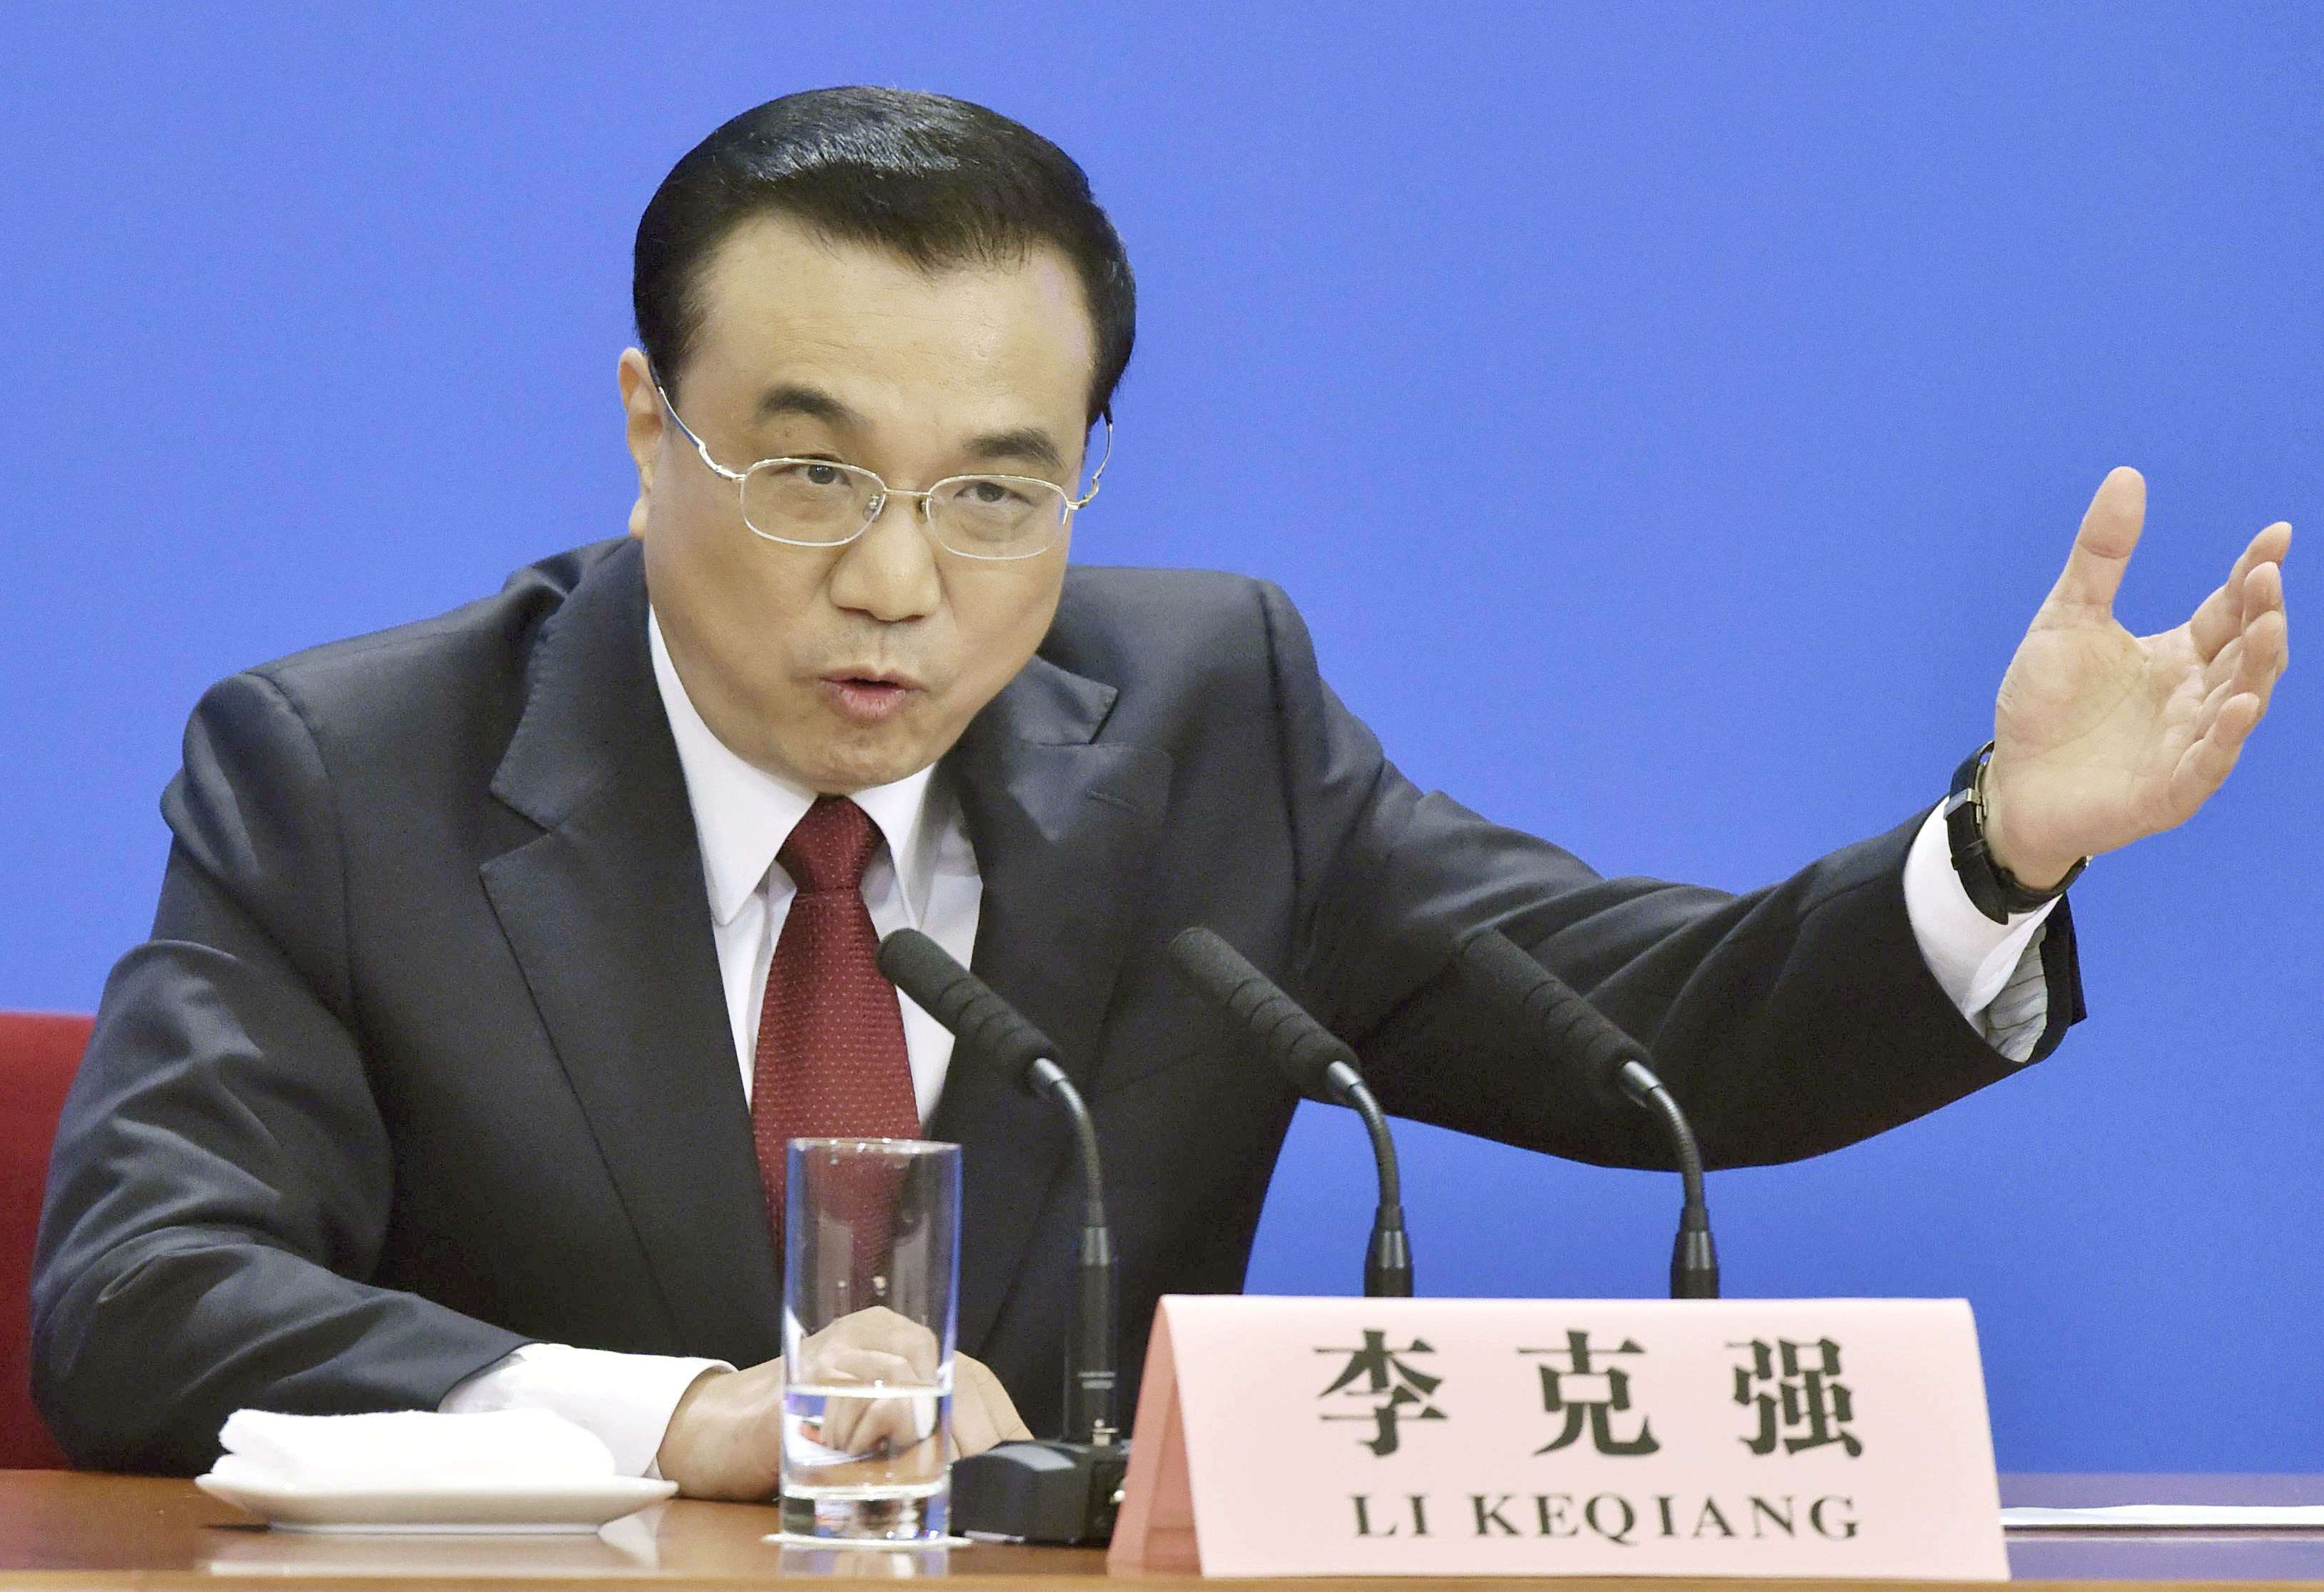 Premier Li Keqiang attends a press conference in Beijing on March 16, 2016, following the closure of the annual session of the National People's Congress. Photo: Kyodo